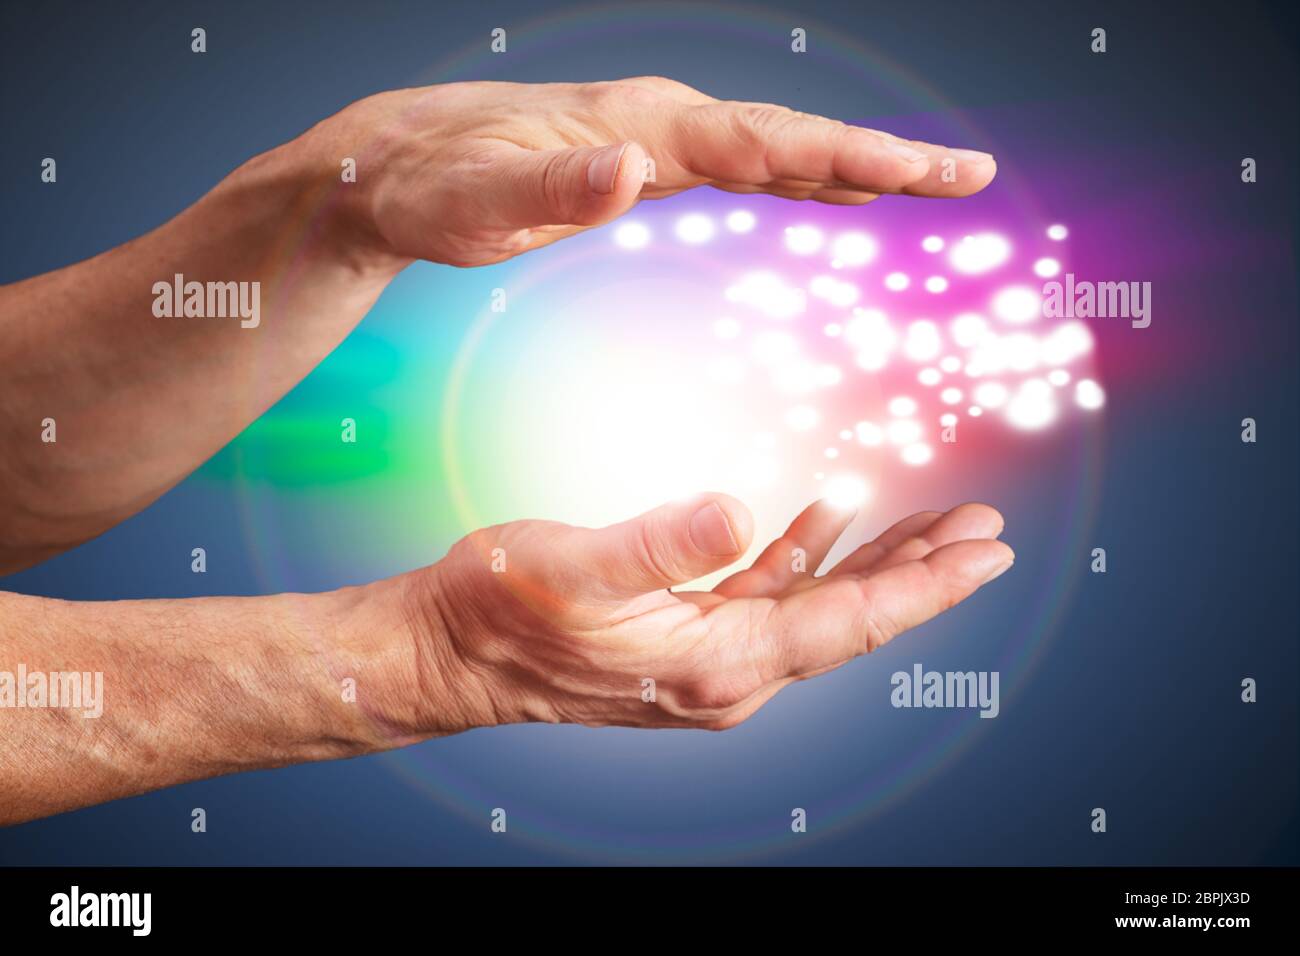 Close-up Of A Person's Hand Holding Light Against Shiny Background Stock Photo